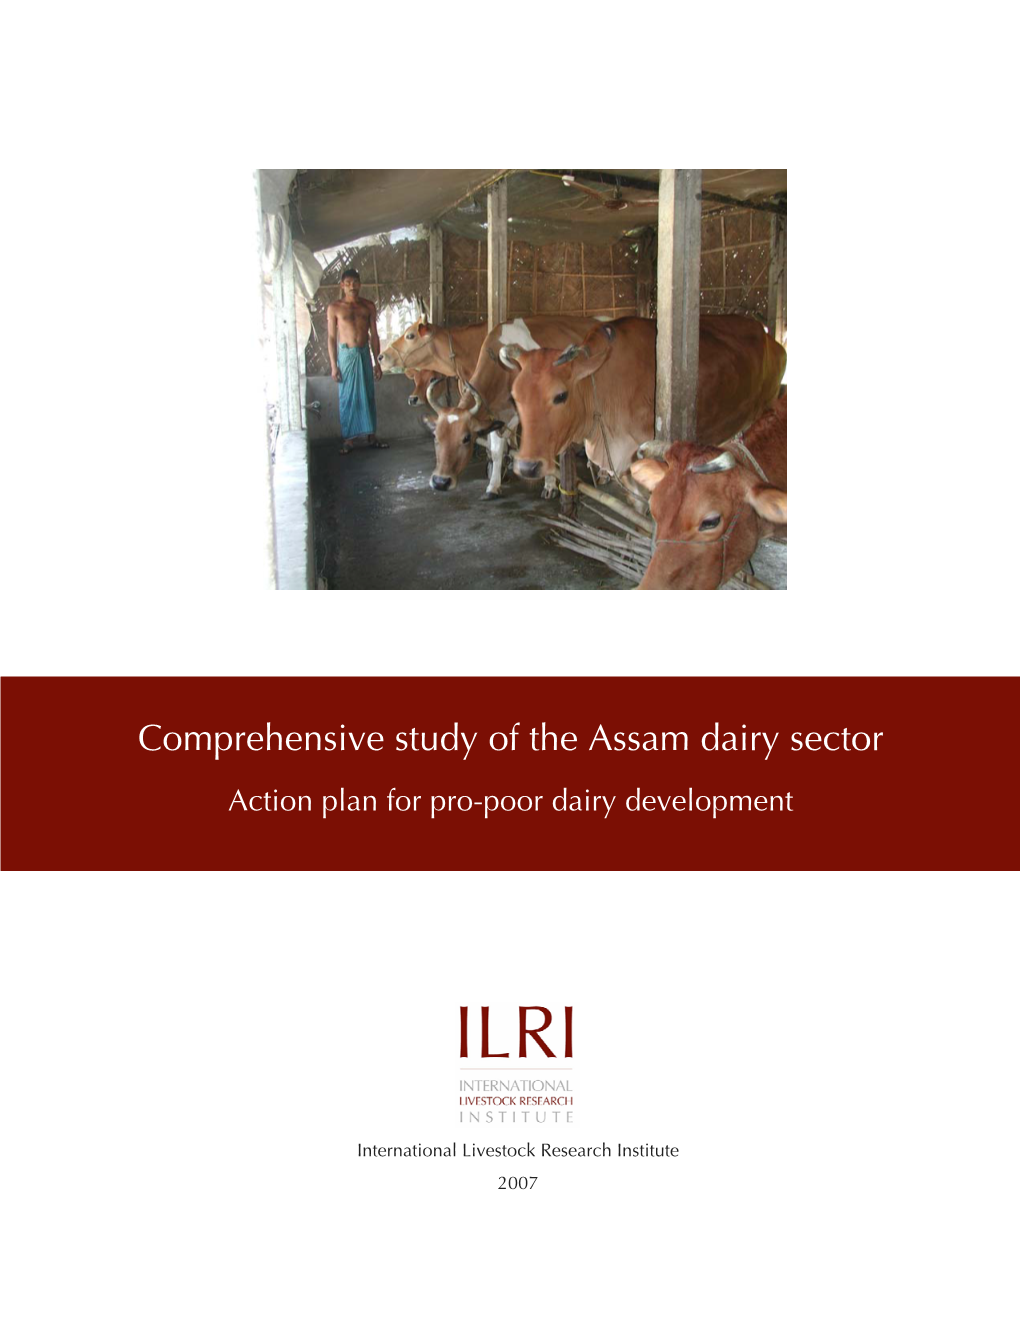 Comprehensive Study of the Assam Dairy Sector